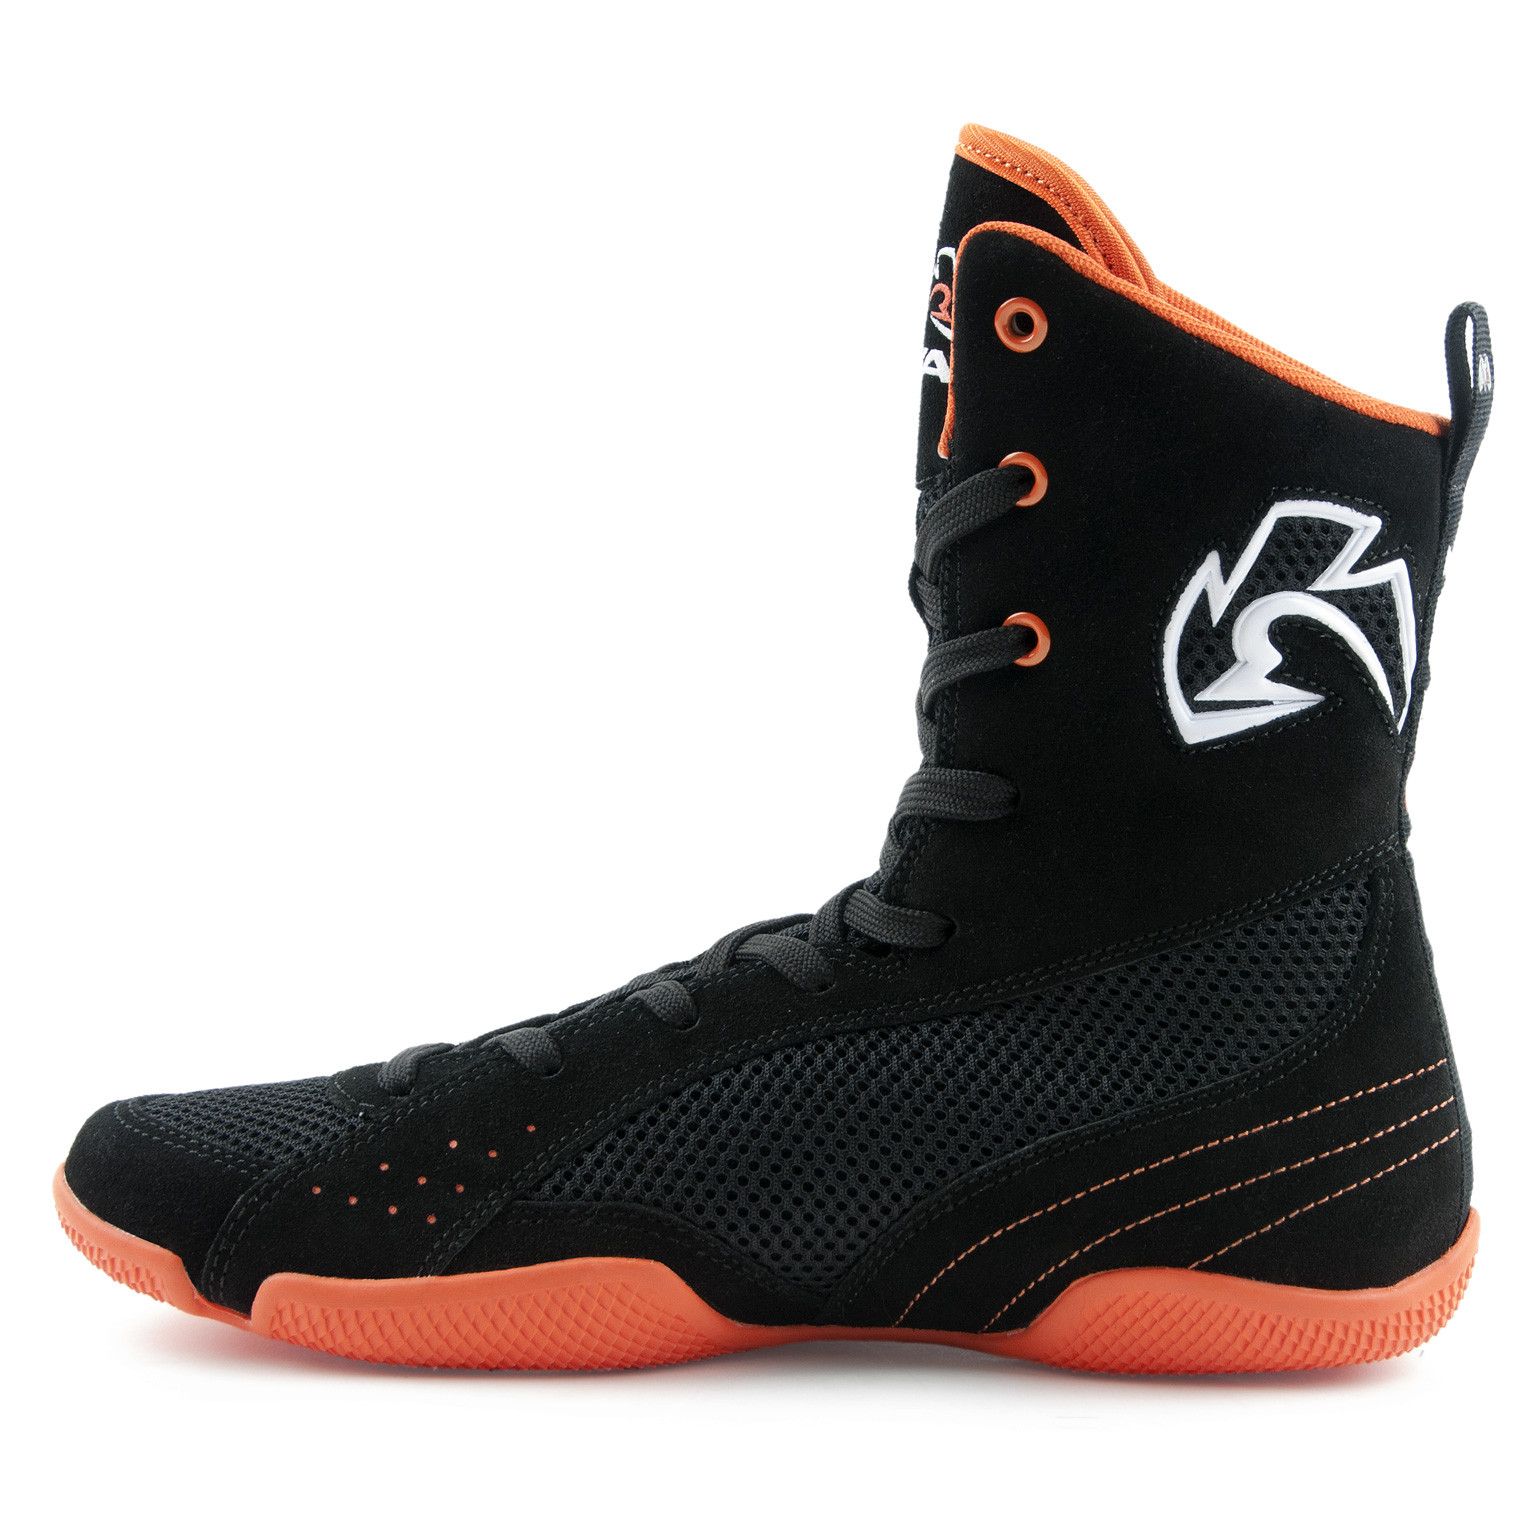 Rival RSX 1 Boxing Boot